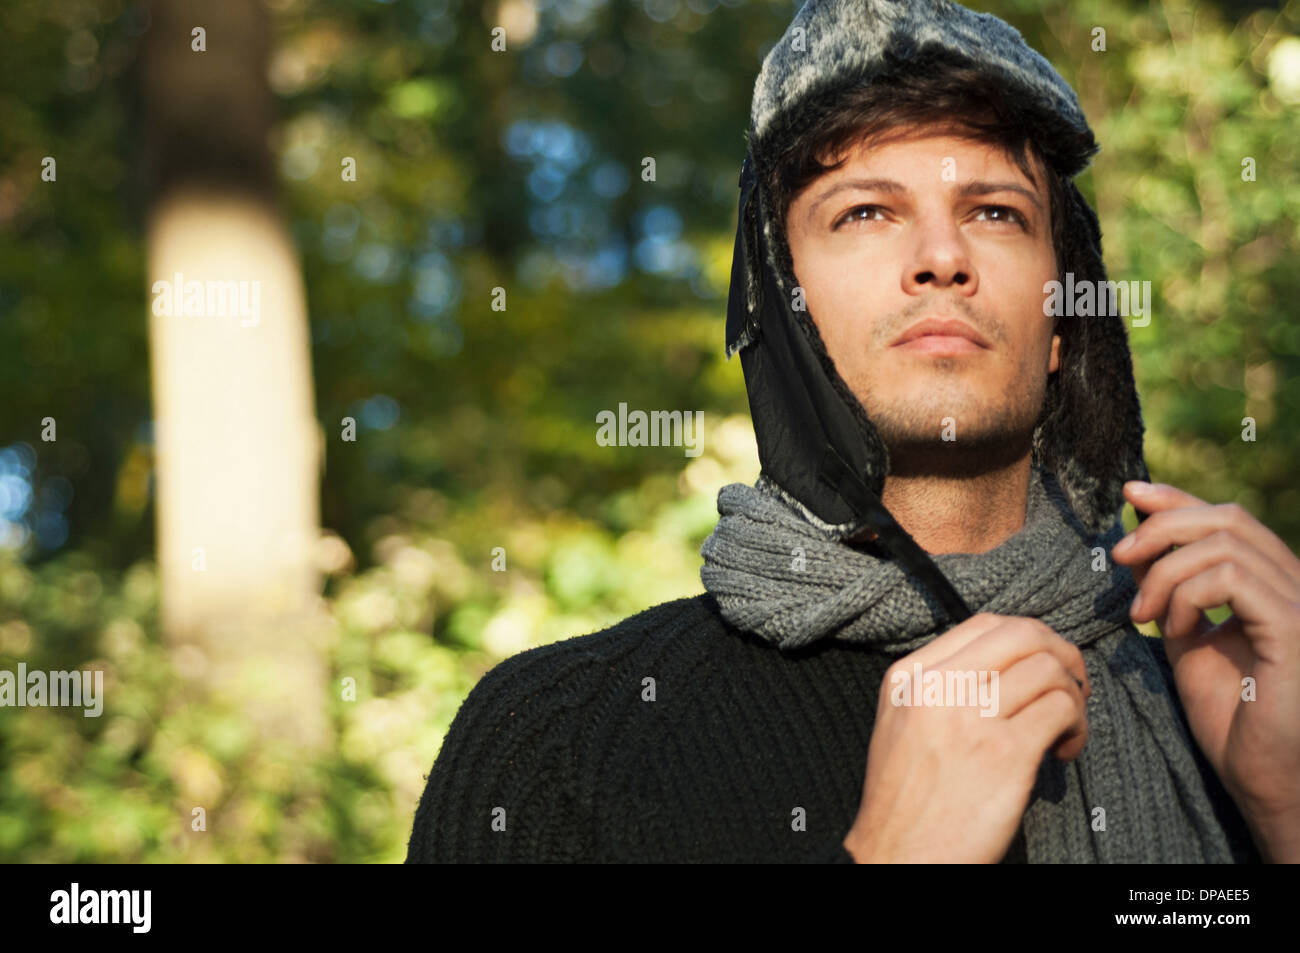 Portrait of man wearing hat and scarf, looking away Stock Photo